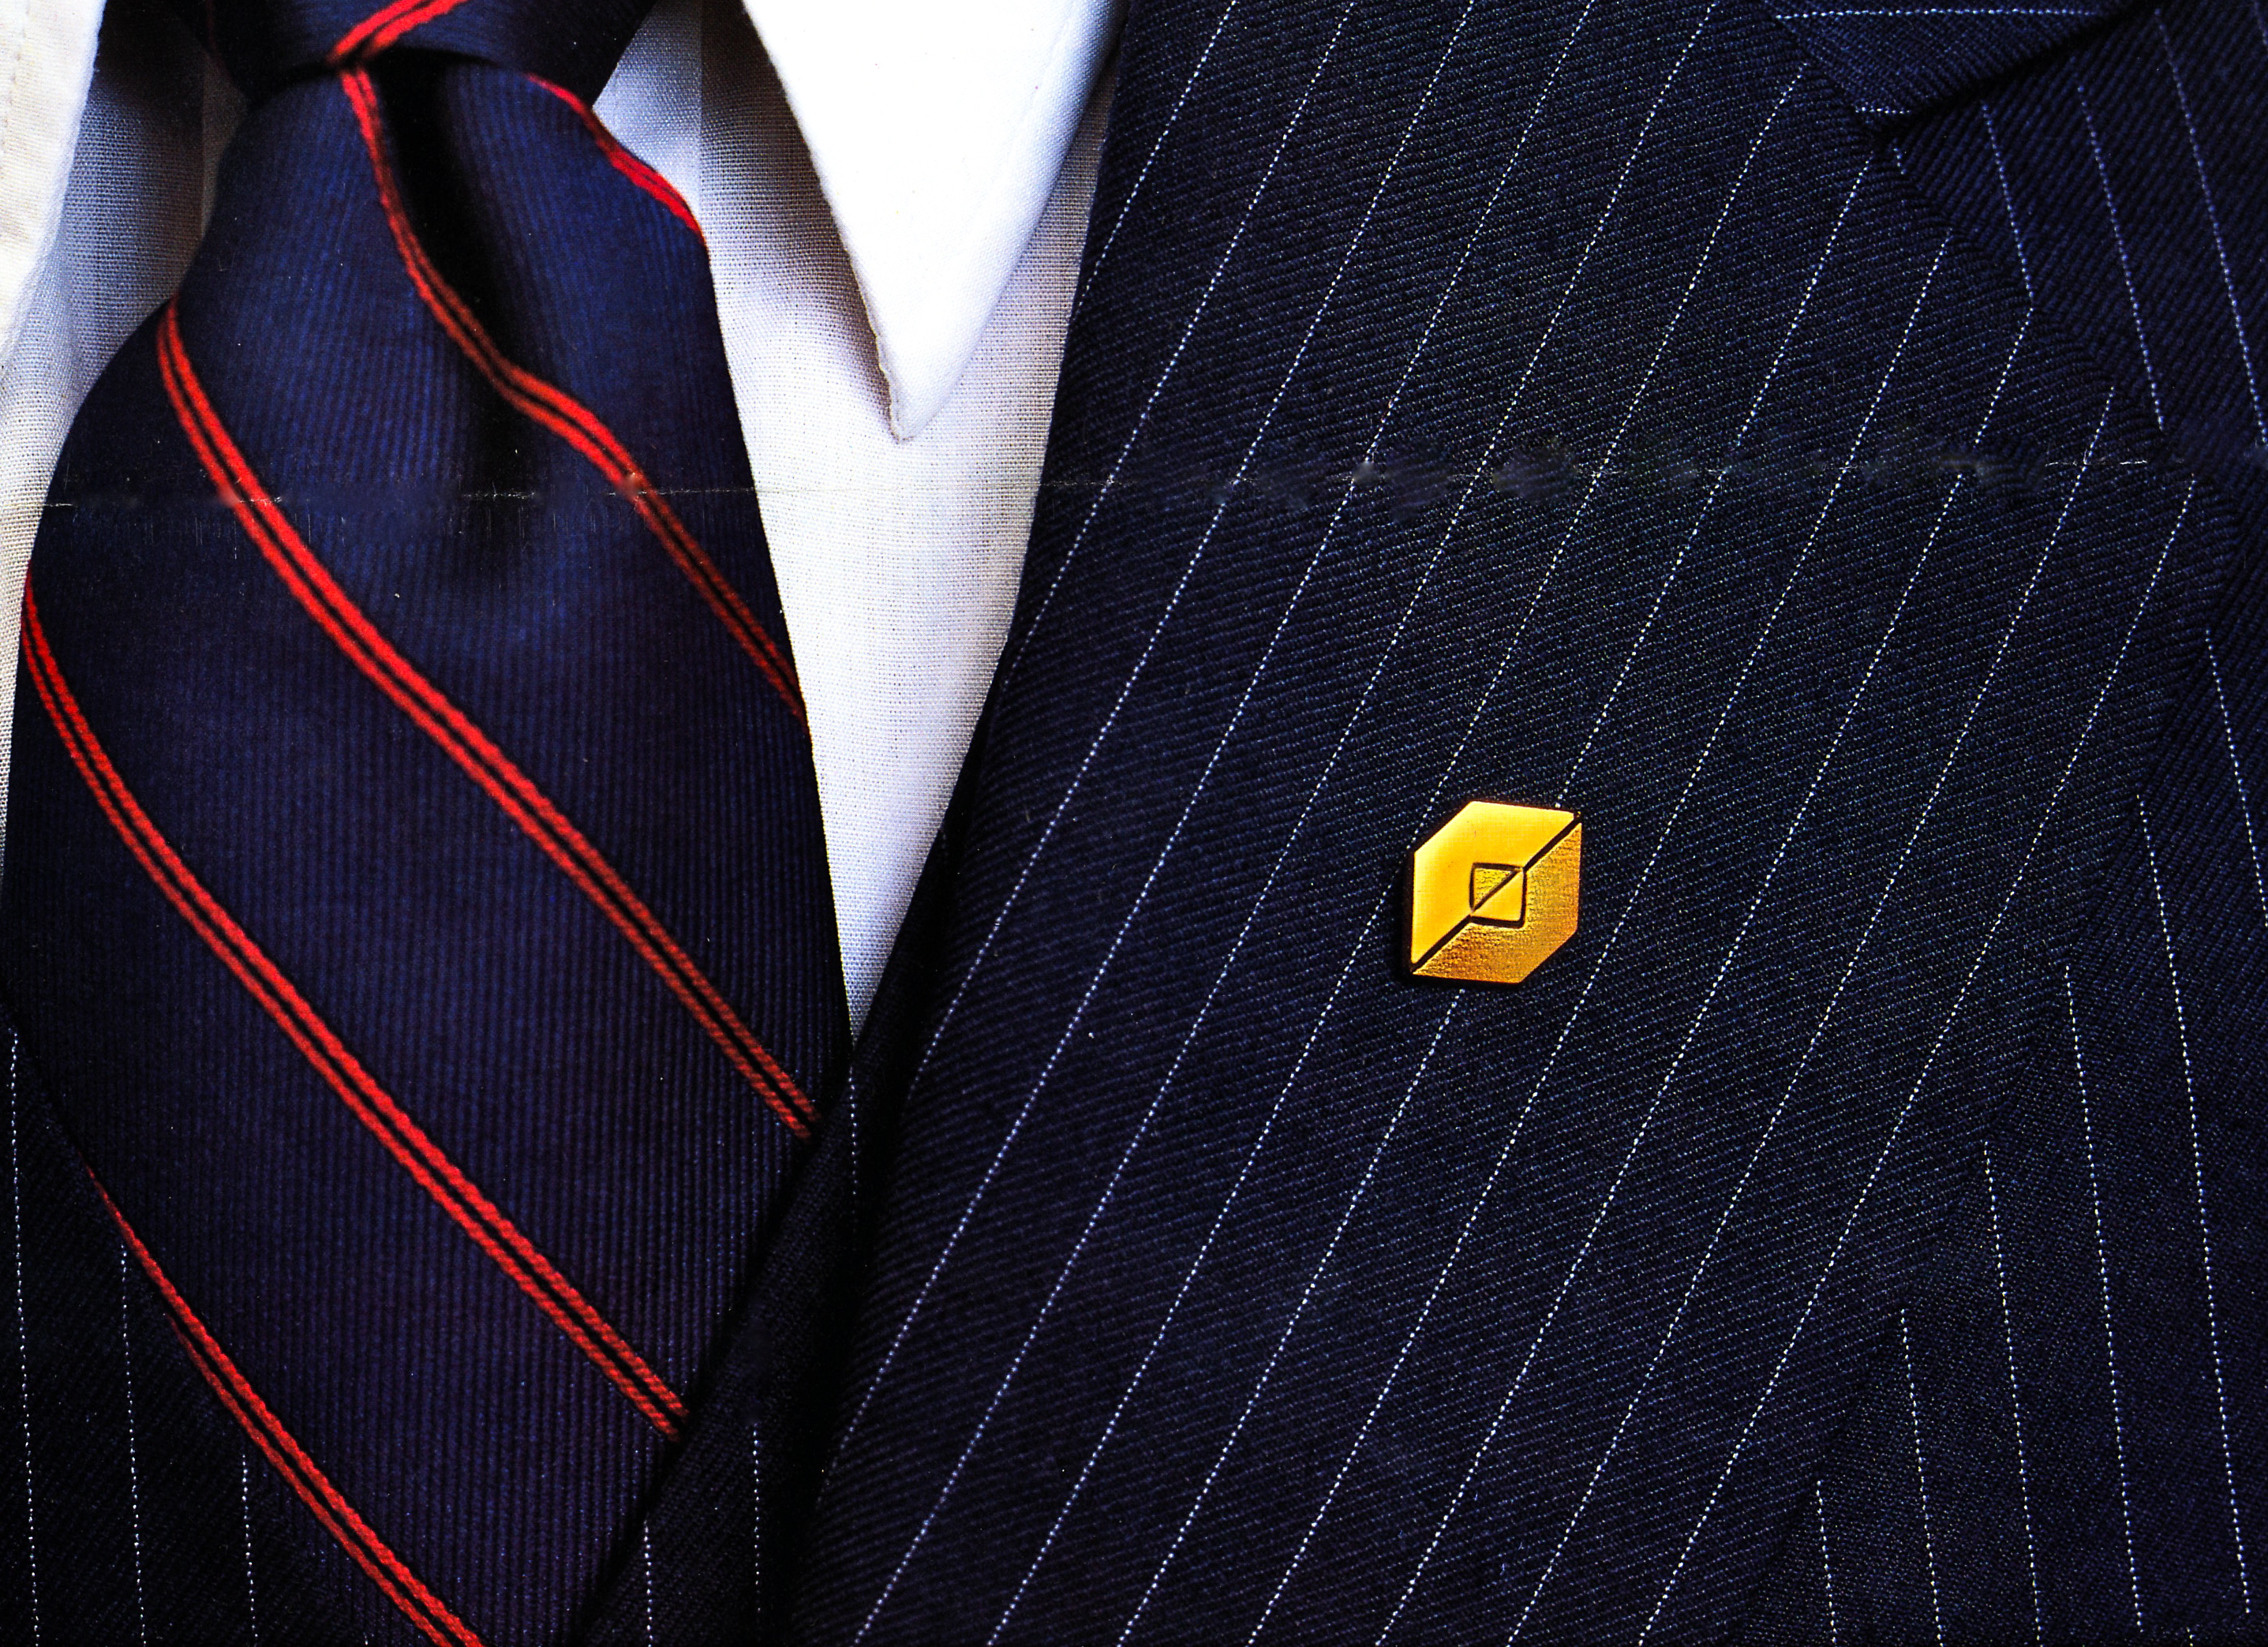 The new Fidelity logo as a gold pot metal lapel pin attached to the lapel of a suit.